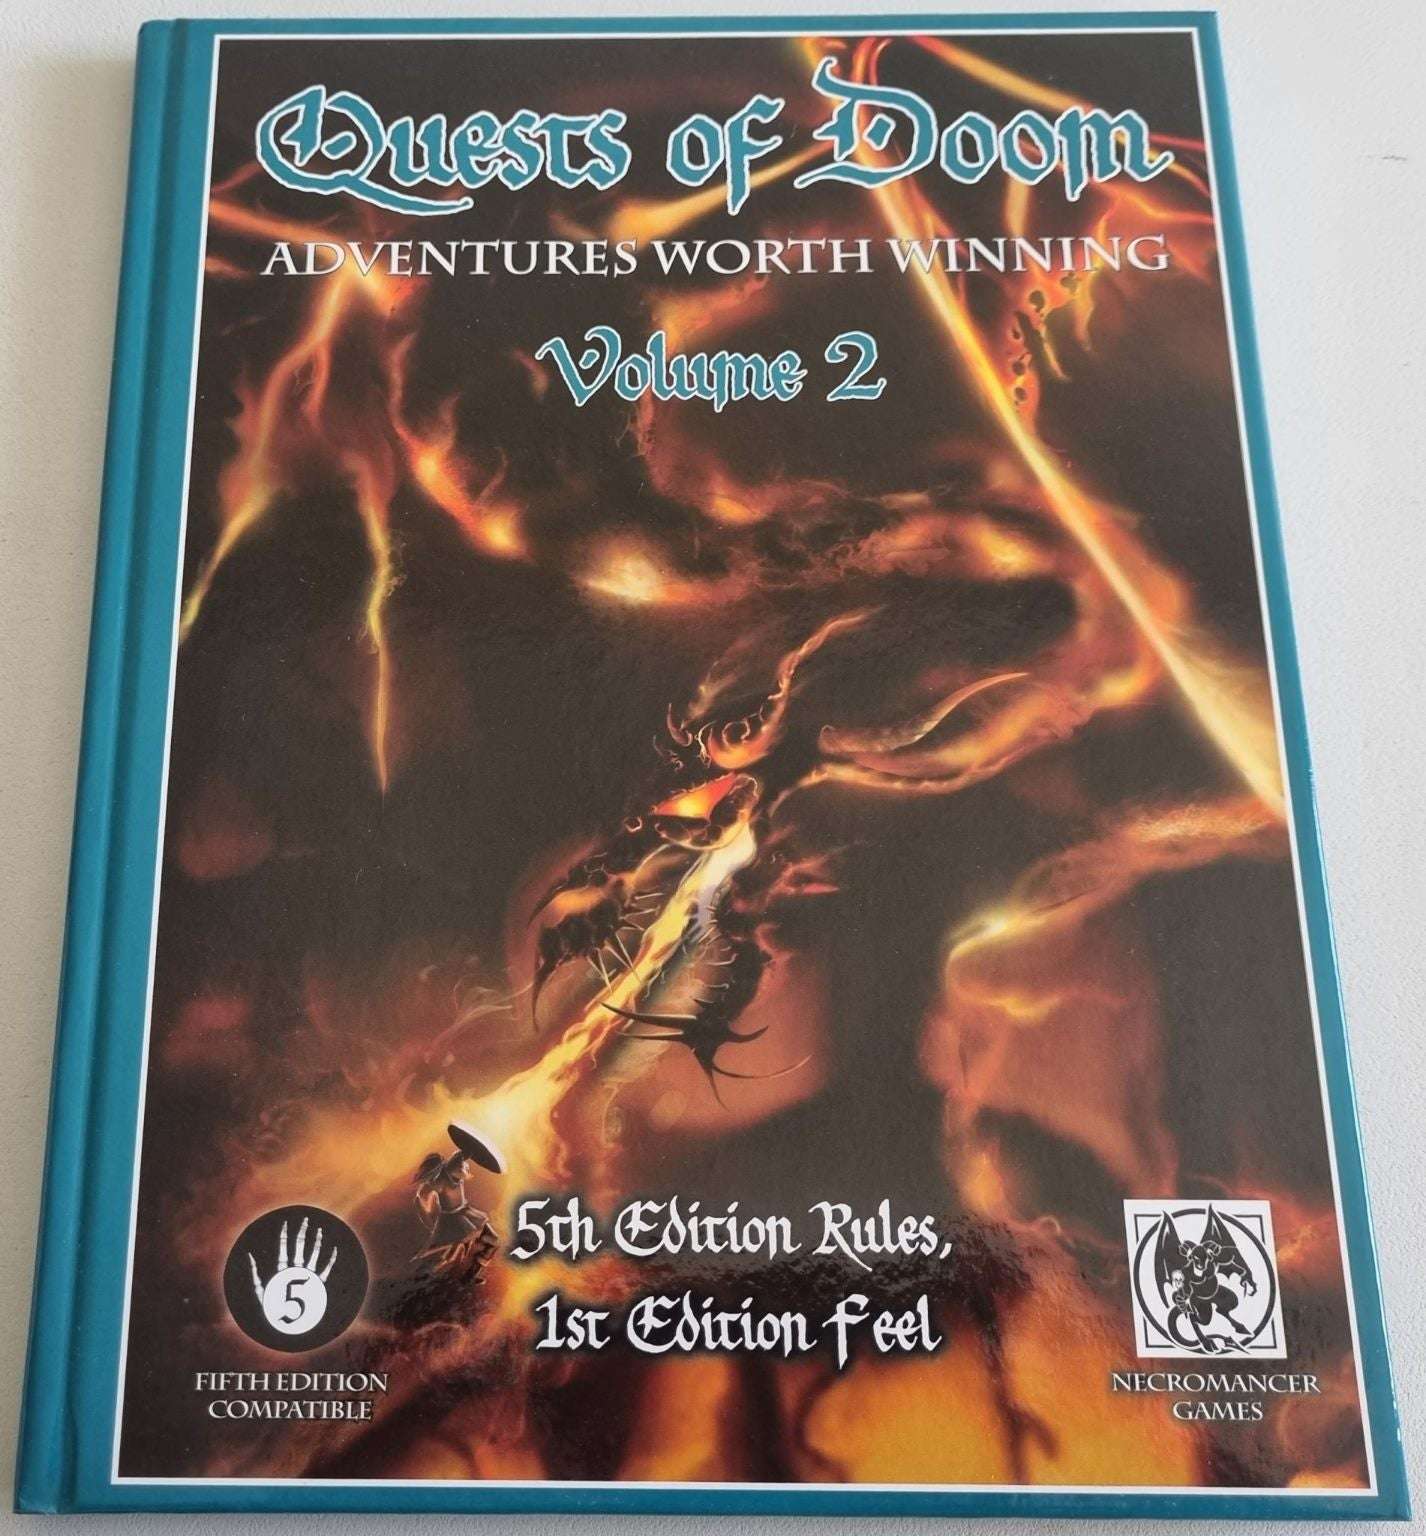 Quests of Doom: Adventures Worth Winning - Volume 2 - D&D 5th Edition (5e)